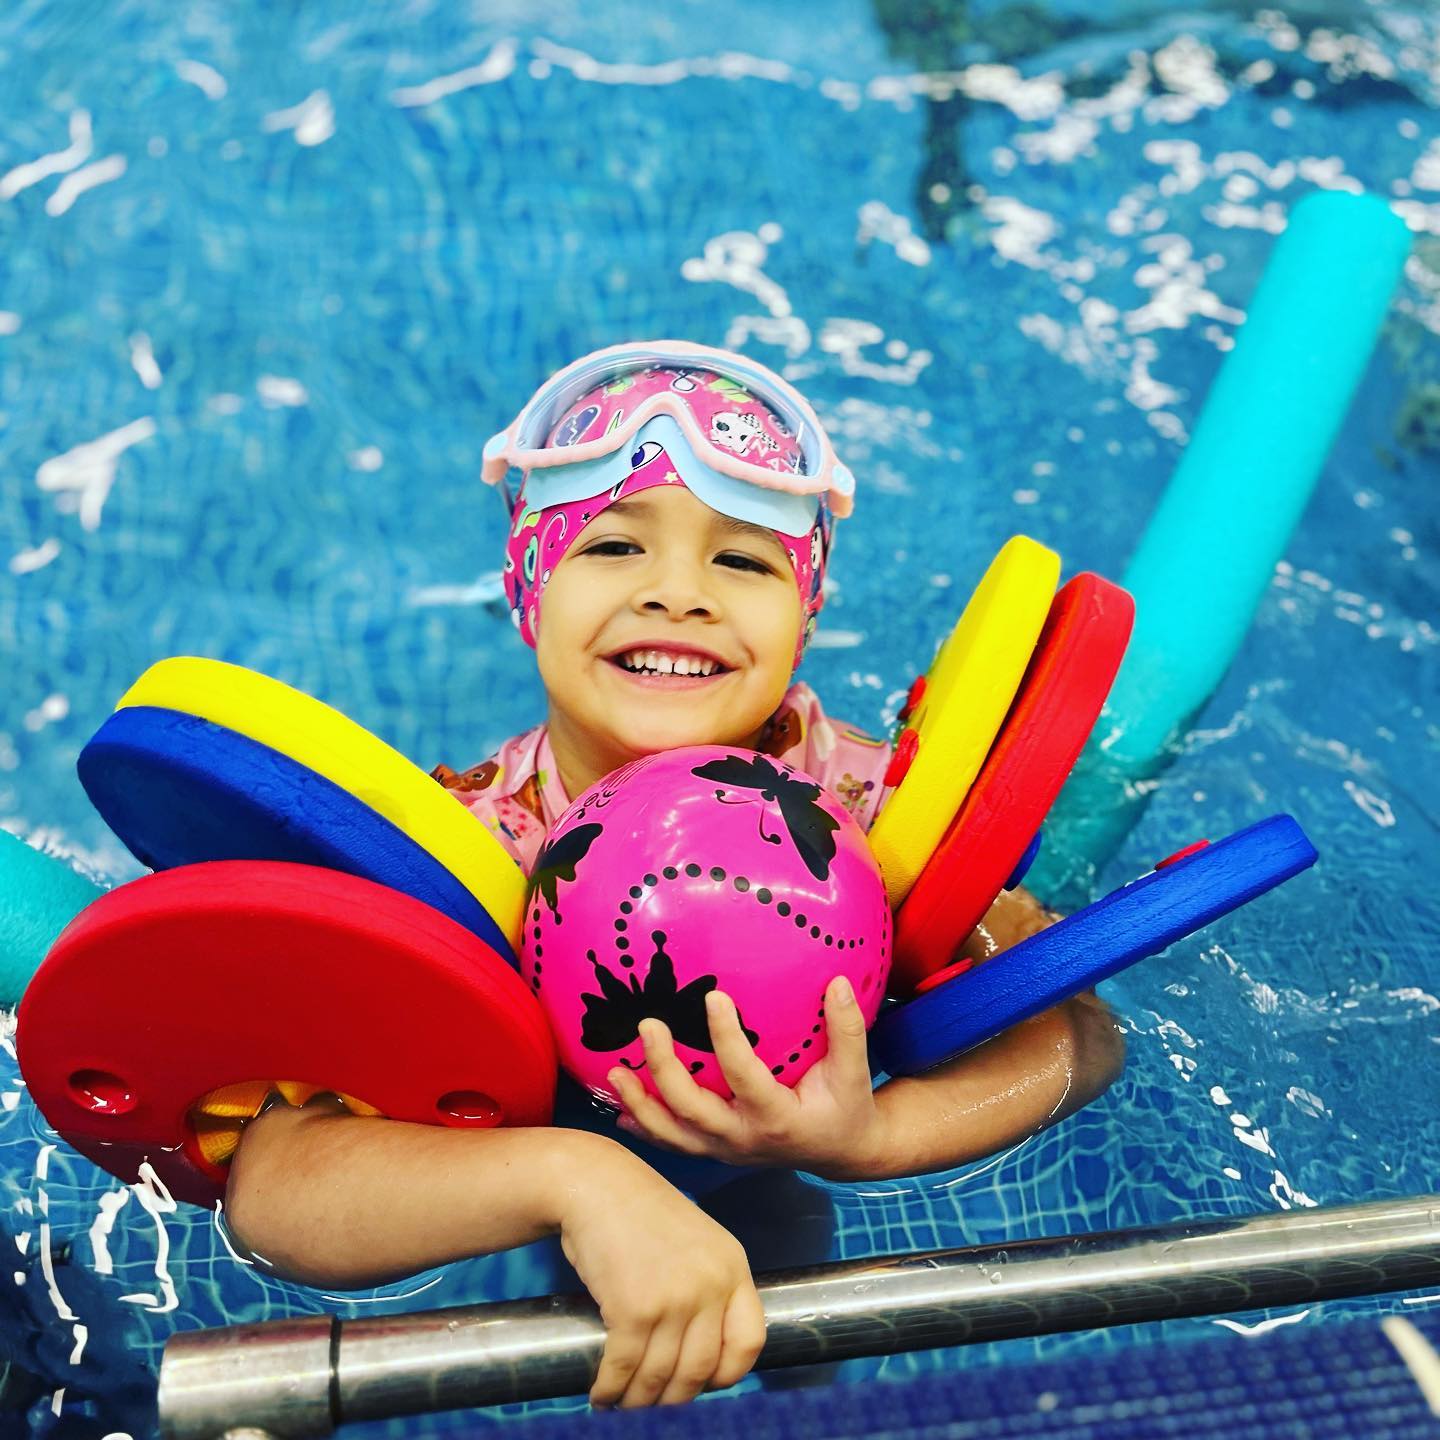 All little fish 🐠 welcome to join our swimming lessons every weekend#🏊‍♀️📍Wilnecote school. Tamworth 
#awimmingpool  #swimminglessons